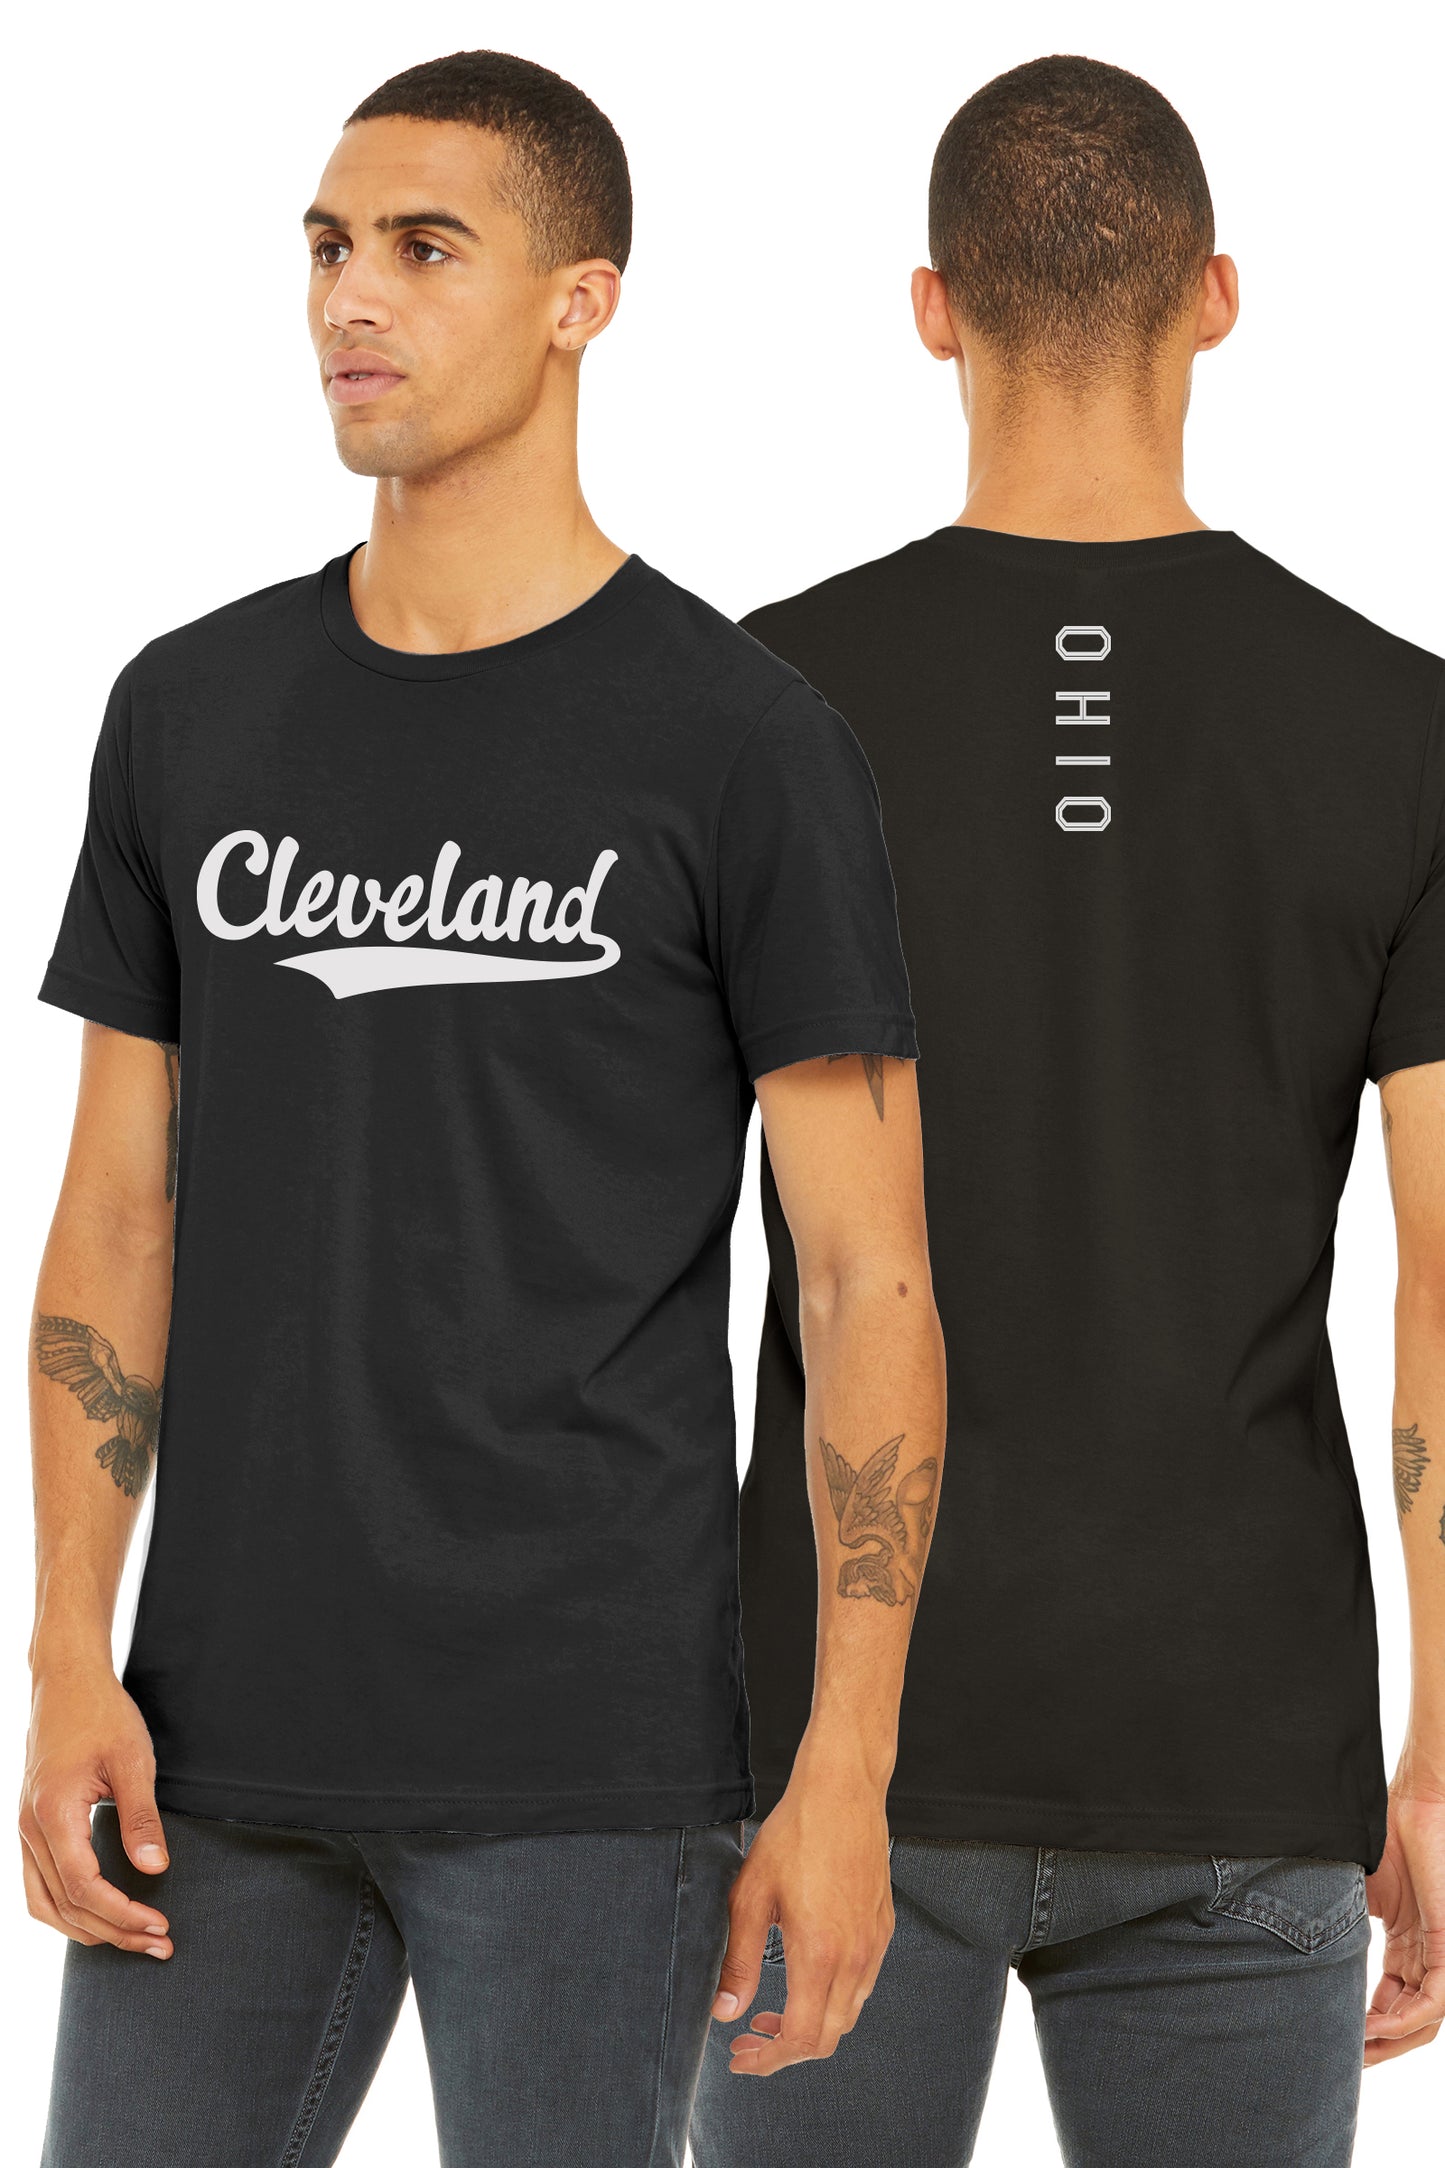 Daxton Adult Unisex Tshirt Cleveland Script with Ohio Vertical on the Back